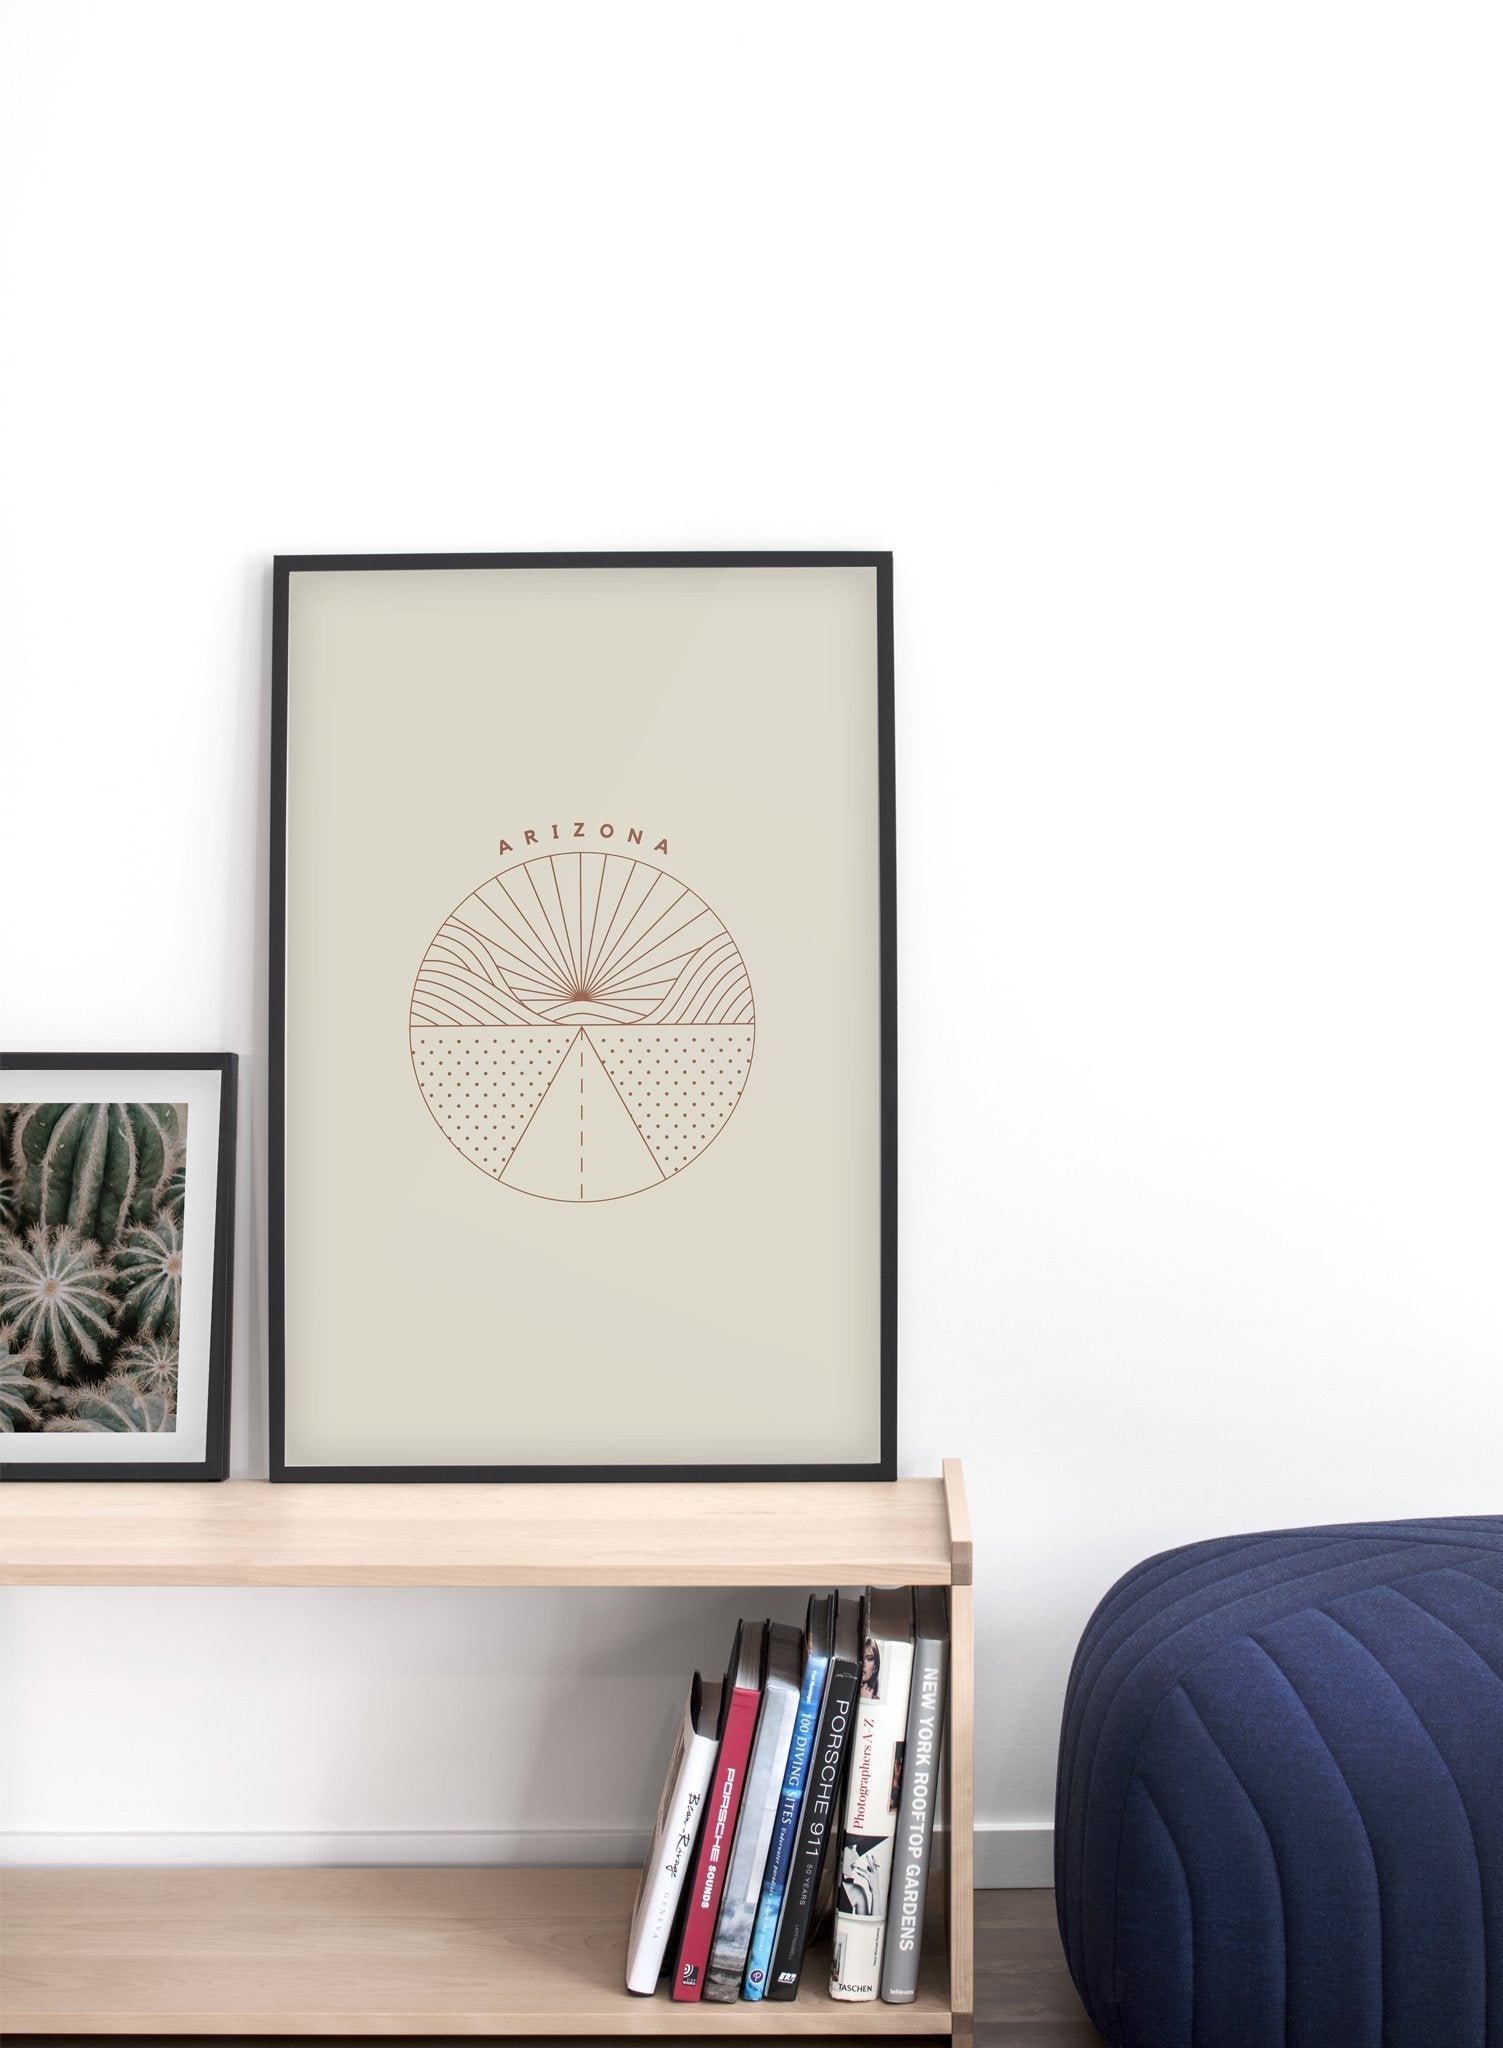 Arizona modern minimalist abstract design poster by Opposite Wall - Living room